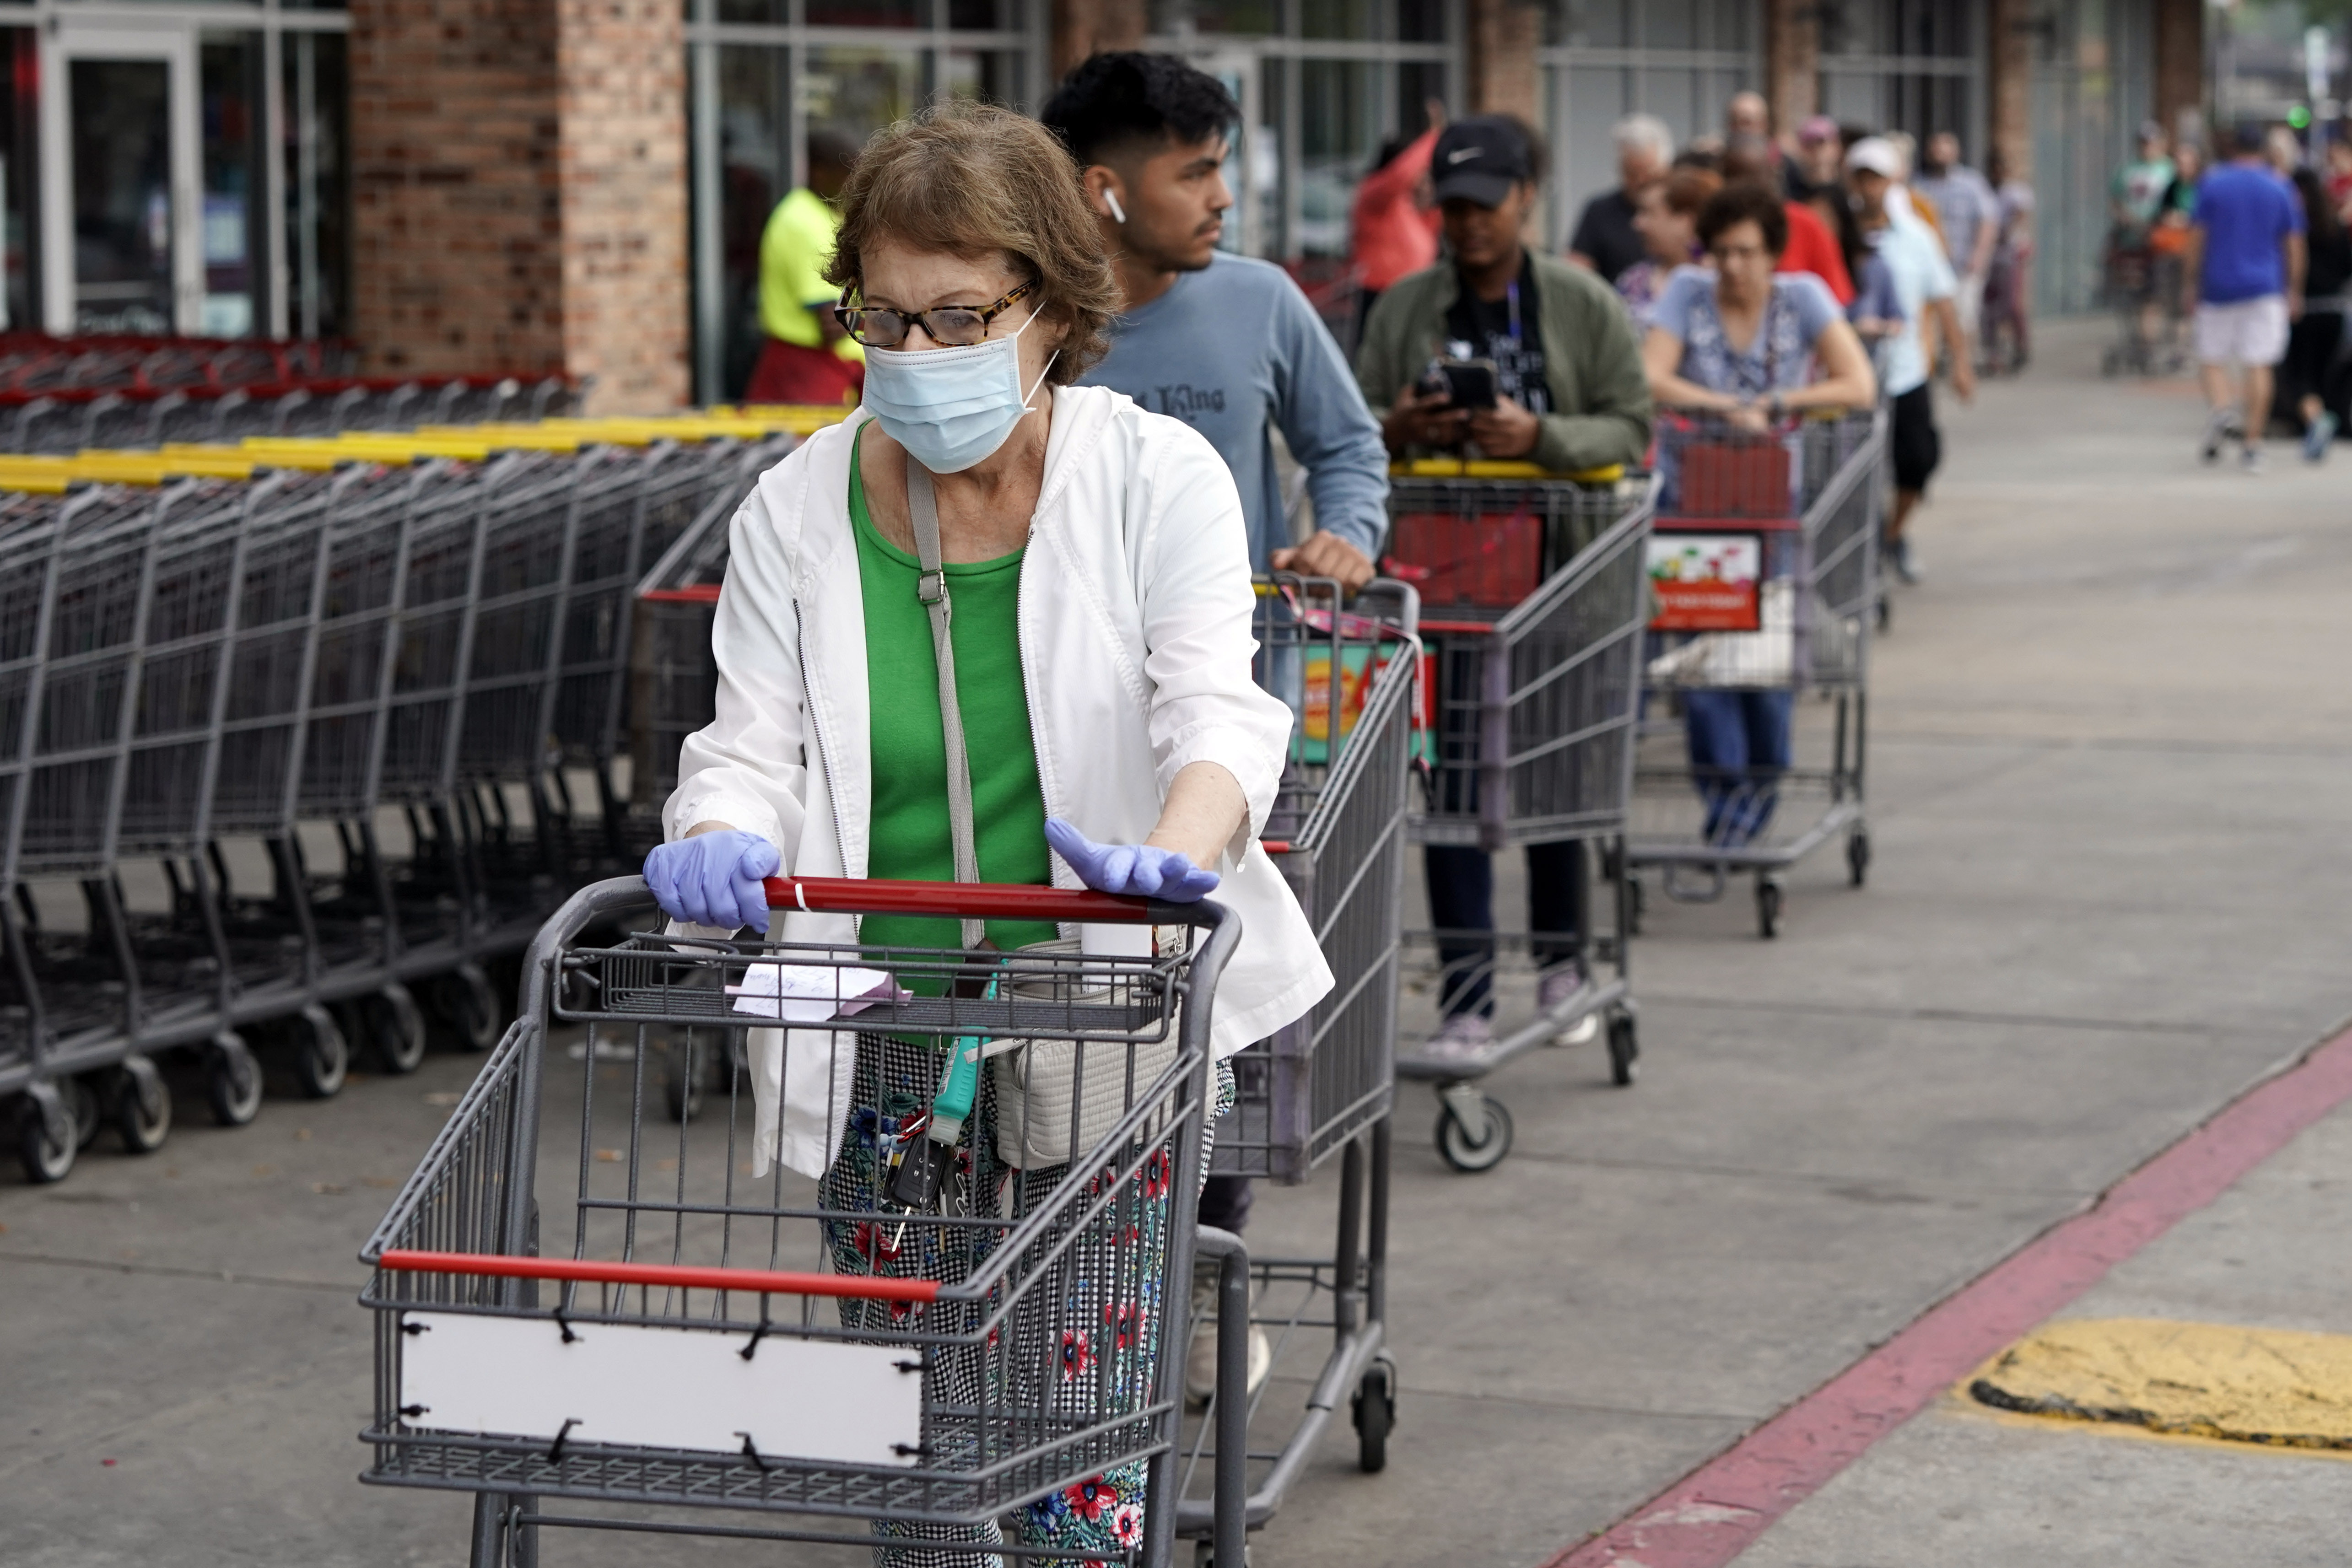 A white woman with brown and gray hair wears a mask and gloves as she enters an H-E-B grocery after waiting in line with more than 150 people. She’s pushing a grocery basket.